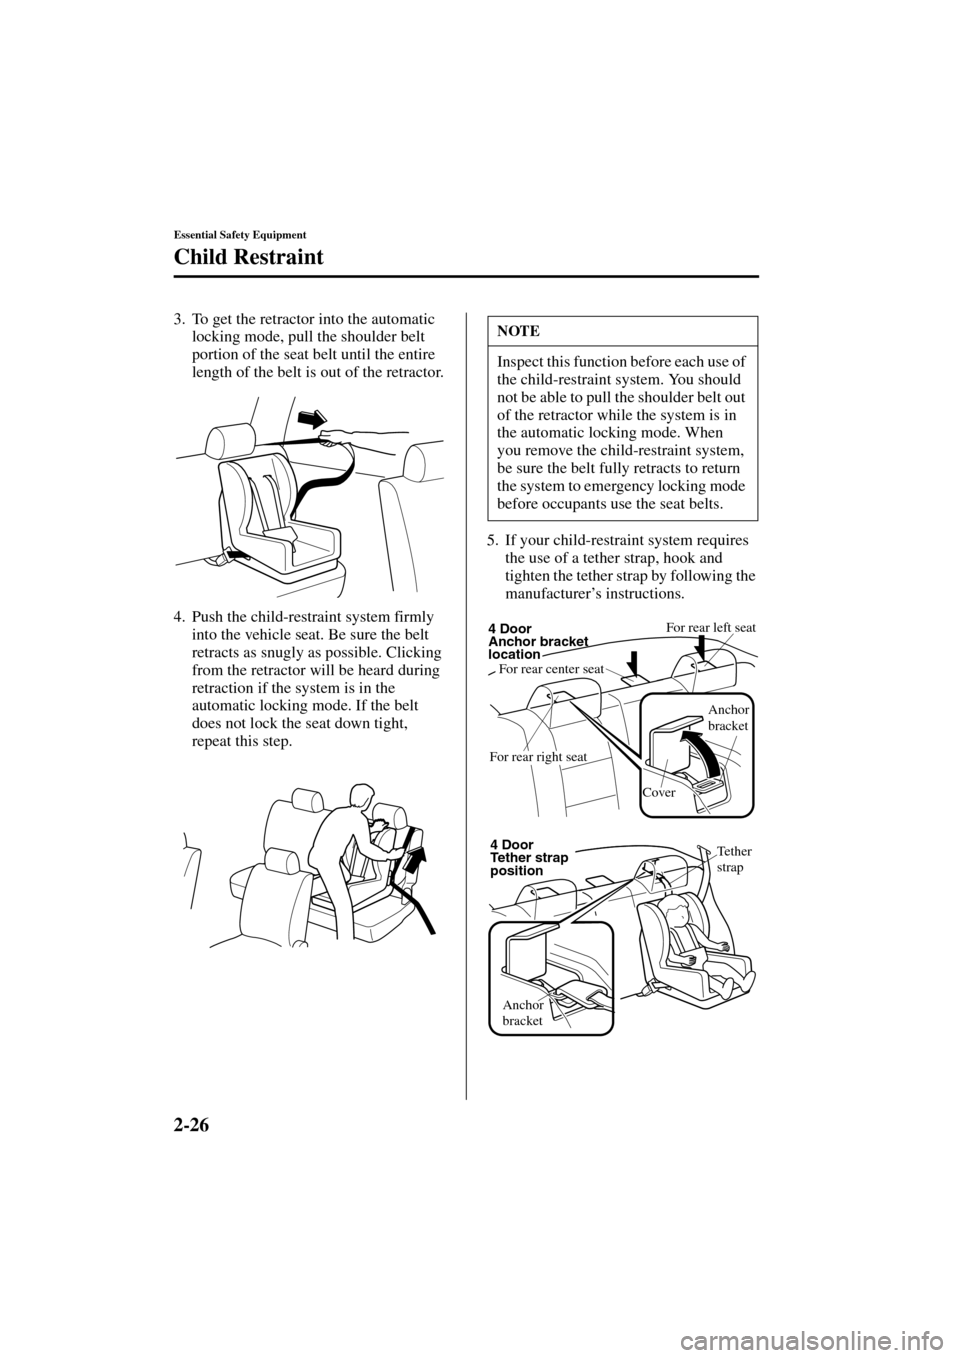 MAZDA MODEL 3 HATCHBACK 2004   (in English) Owners Guide 2-26
Essential Safety Equipment
Child Restraint
Form No. 8S18-EA-03I
3. To get the retractor into the automatic 
locking mode, pull the shoulder belt 
portion of the seat belt until the entire 
length